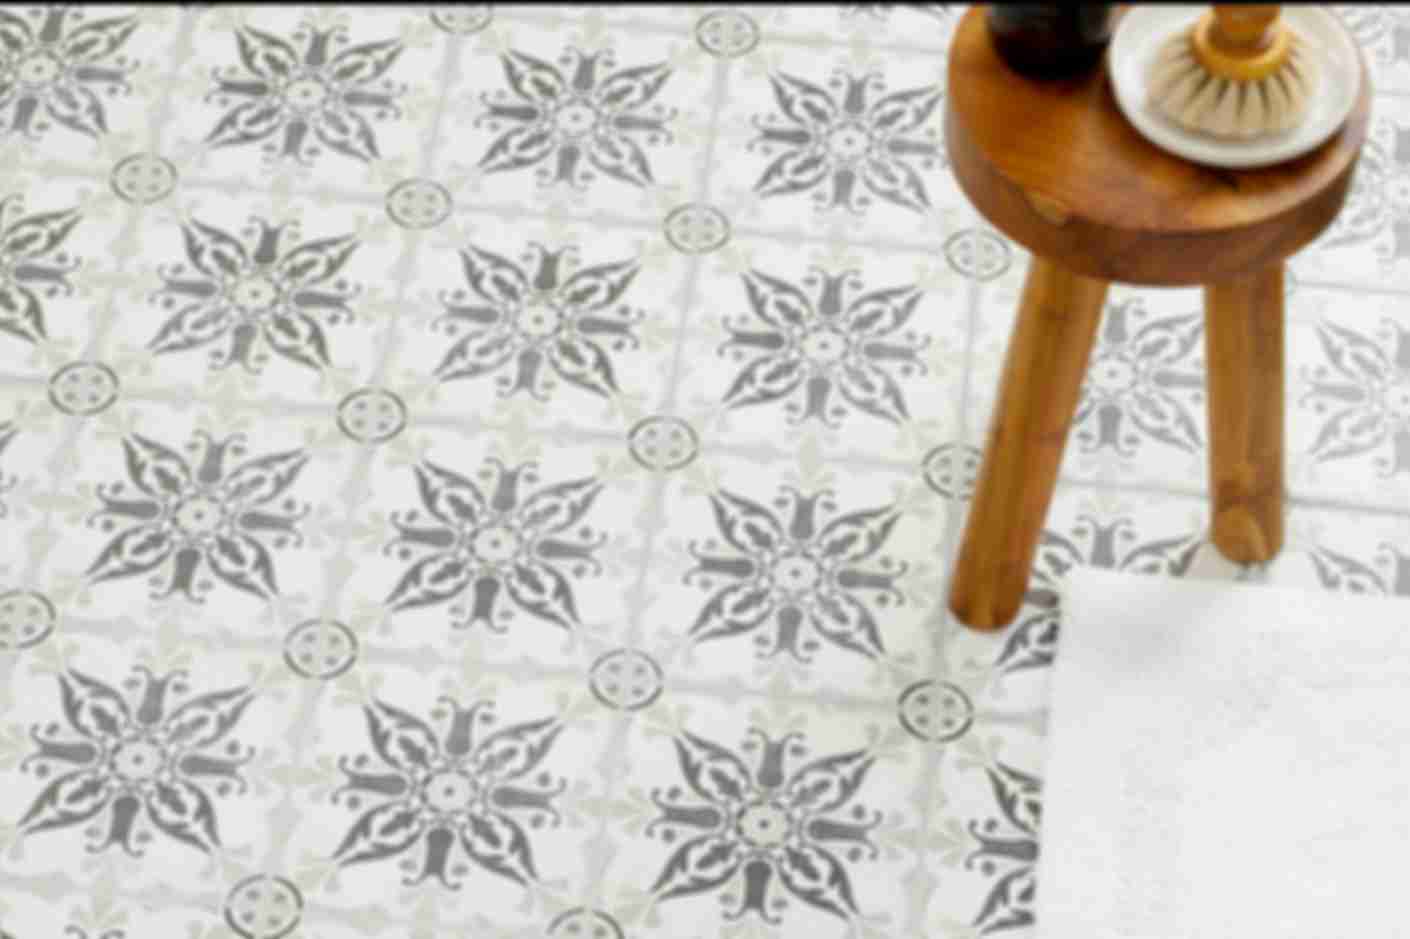 Tiled floor with a light and dark grey floral pattern and a wooden accent stool.